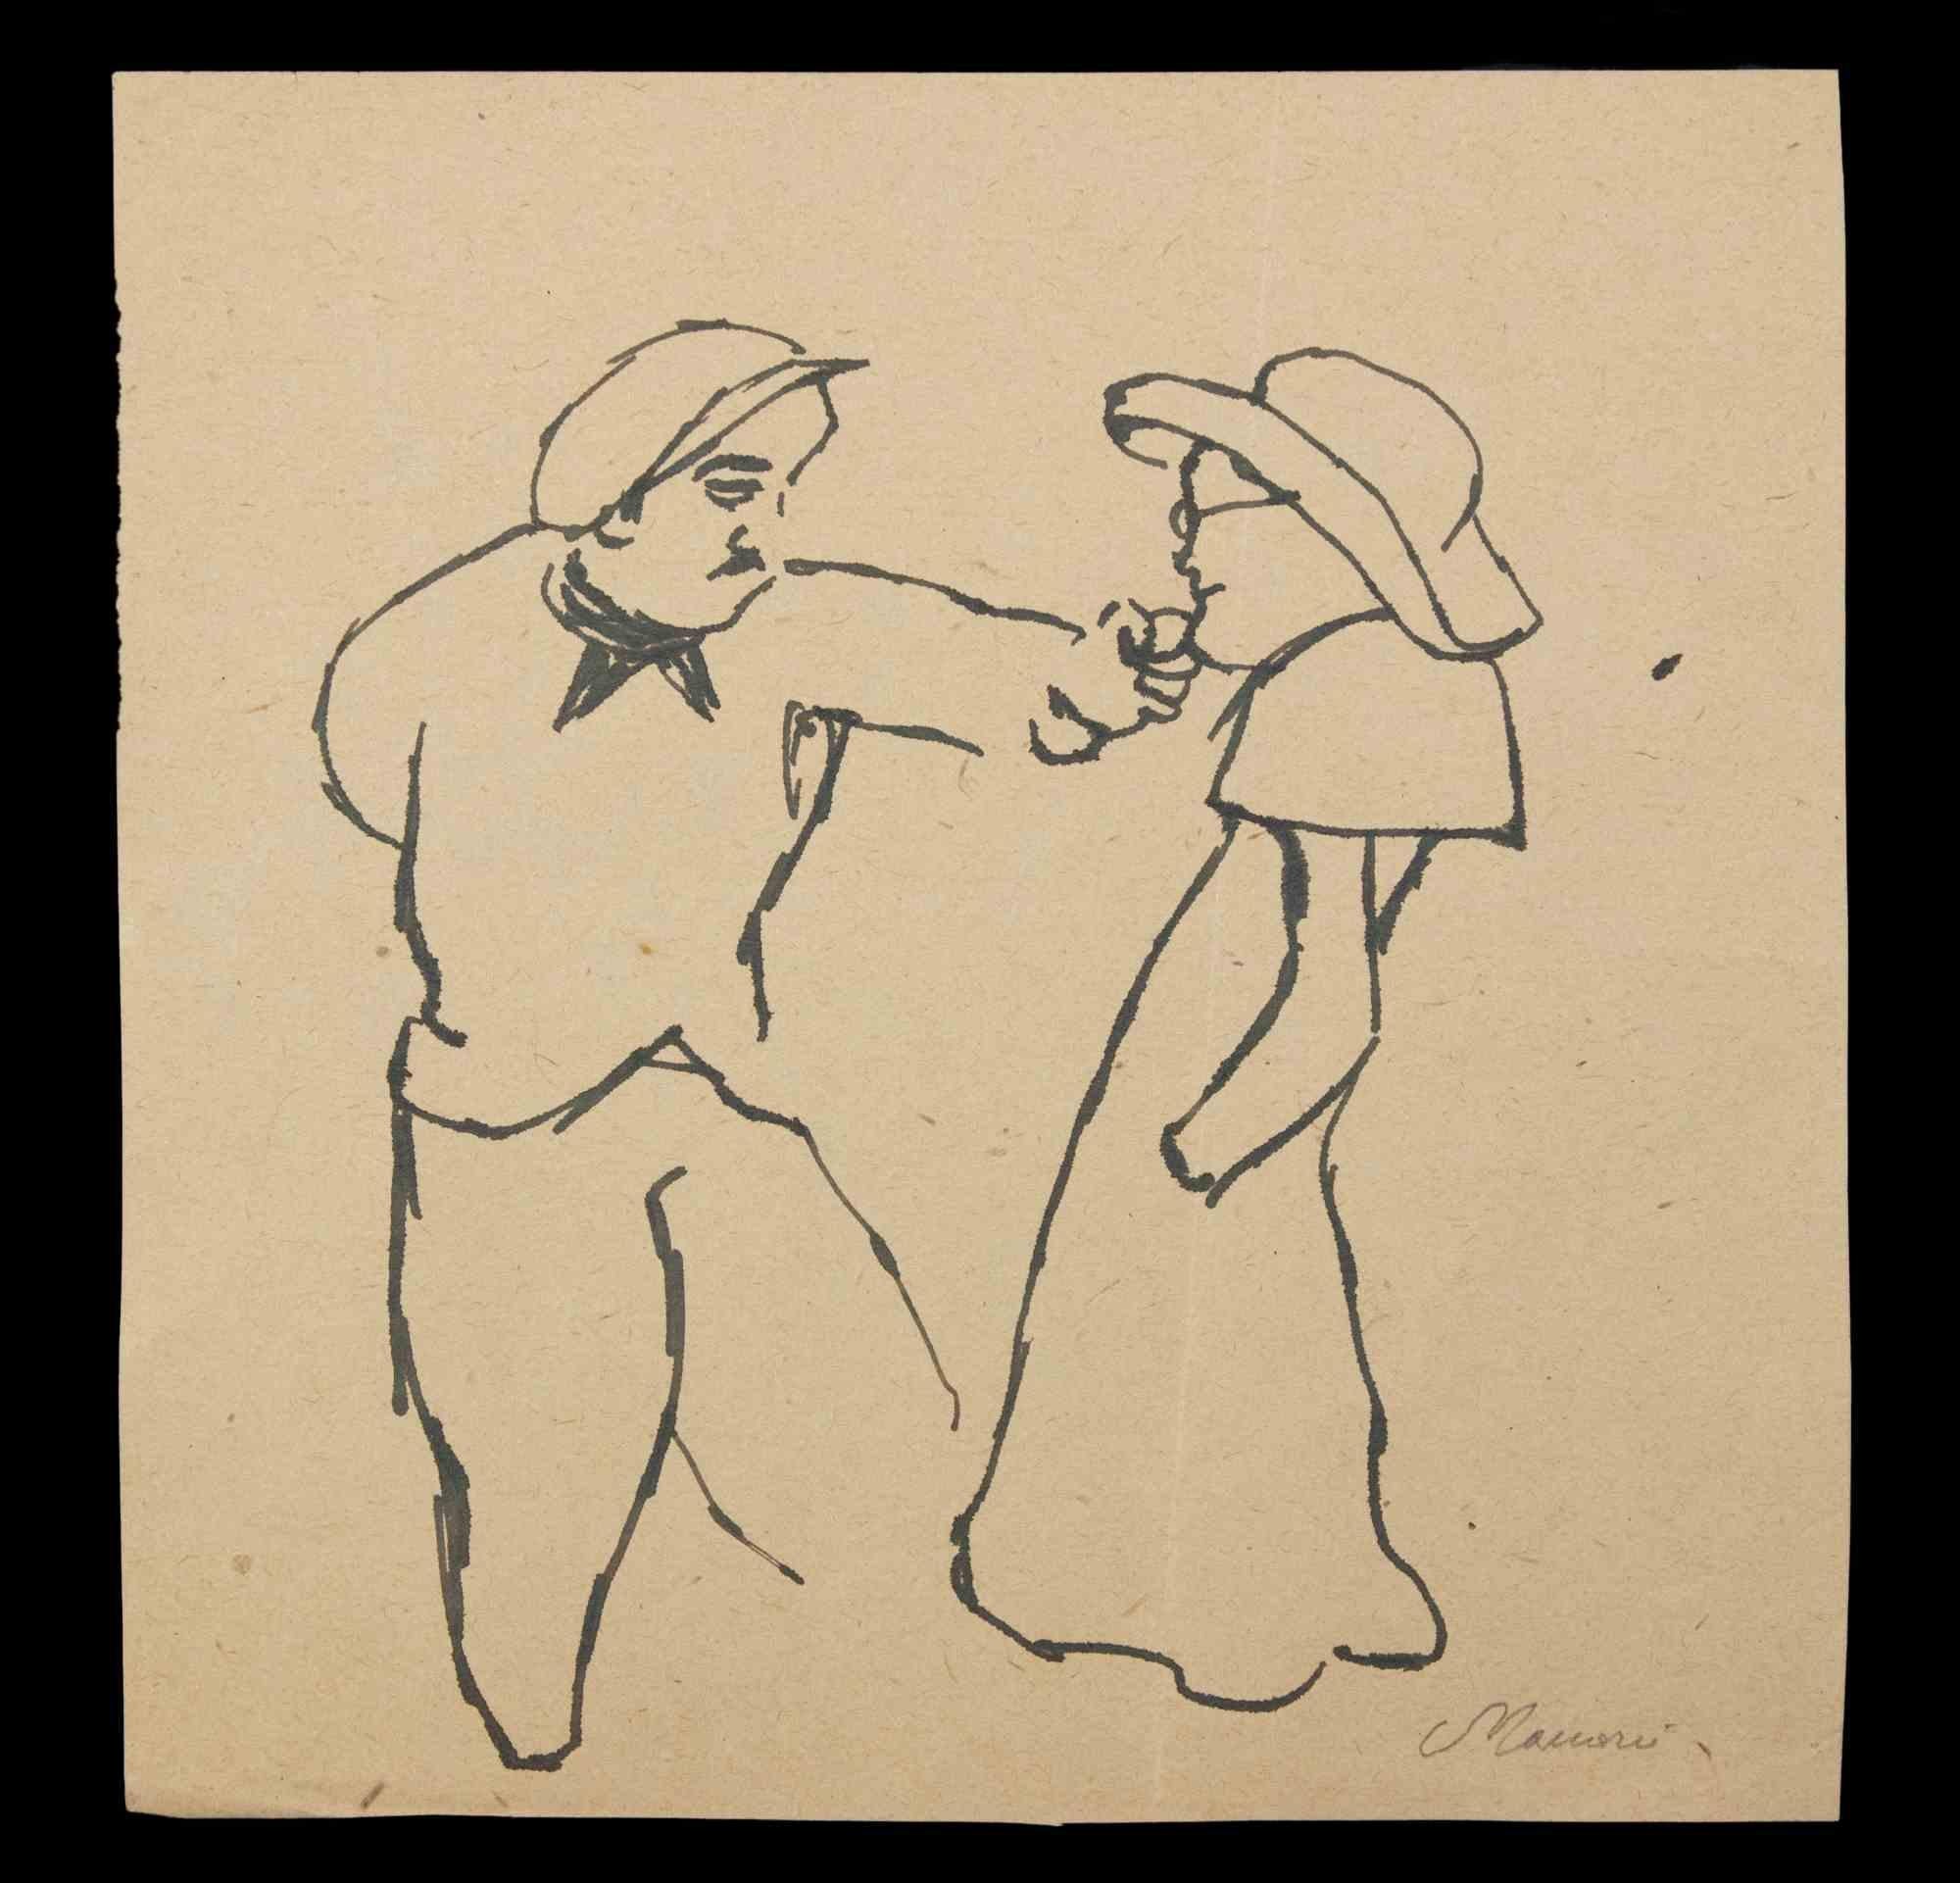 The Priest and the Worker is an original China Ink Drawing realized by Mino Maccari in mid-20th Century.

Good condition on

Hand-signed by the artist with pencil.

Mino Maccari (1898-1989) was an Italian writer, painter, engraver and journalist,